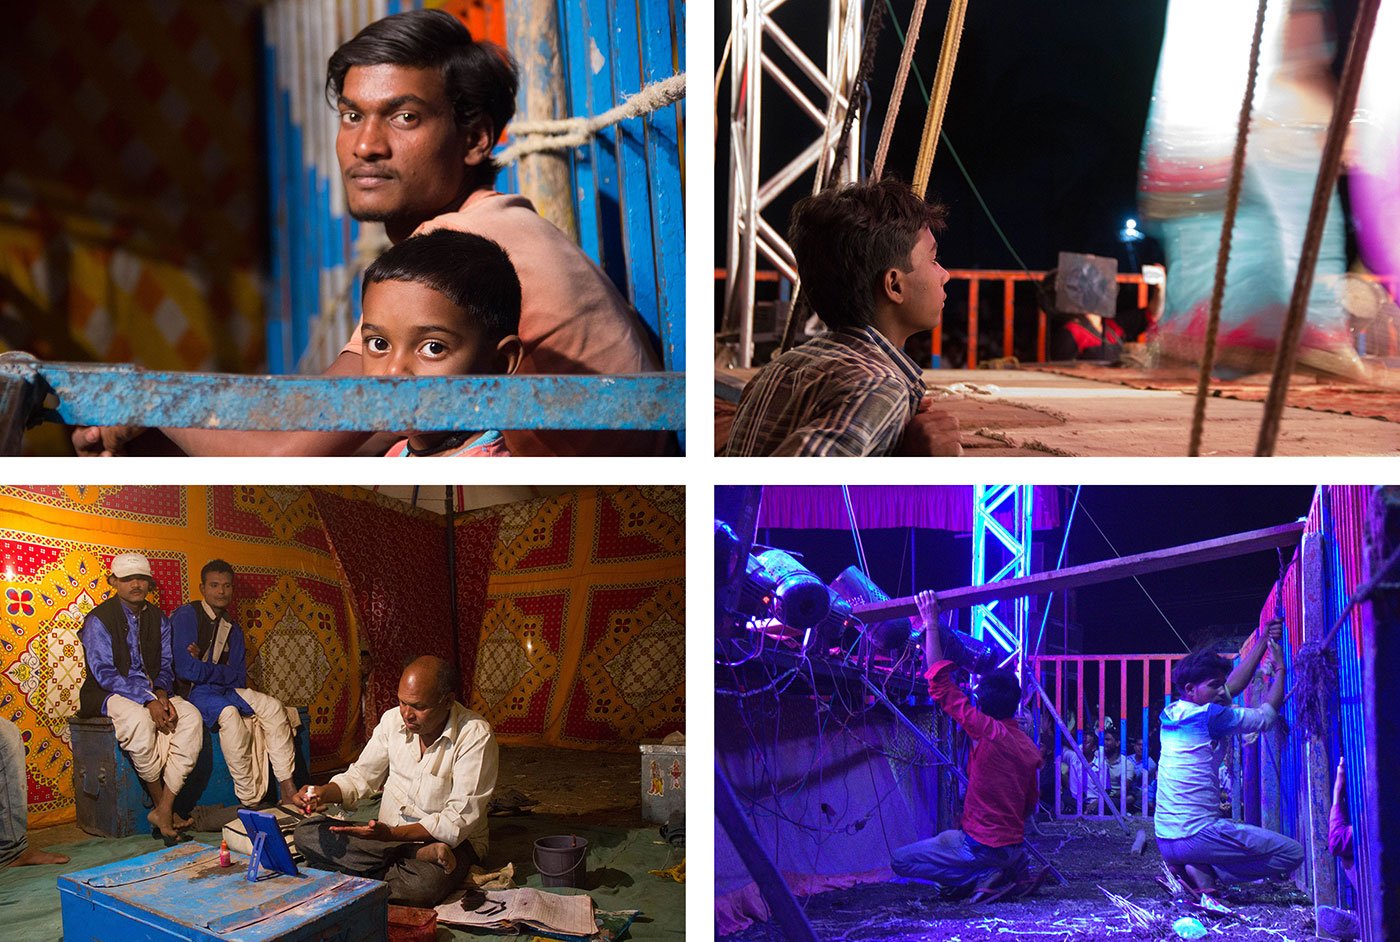 Top left-Labourer Shreeram Paswan watches the tamasha on 11 May 2017 in Gogolwadi village in Pune district in Maharashtra. He is a part of the group of 30 men from Aumau village, Lucknow district, UP. 

Top right-Wireman Suraj Kumar watches the tamasha on 11 May 2017 in Gogolwadi village in Pune district in Maharashtra. 

Bottom left- Some labourers like Anil Pawra (extreme left) also double up as backup singers and dancers in the tamasha. Photo shot on 15 May 2017 in Savlaj village, Sangli district in Maharashtra. 

Bottom right- Labourers hold on to the plank that for a dancer’s performance during the tamasha on 3 May 2018 in Savindne village in Pune district, in western Maharashtra